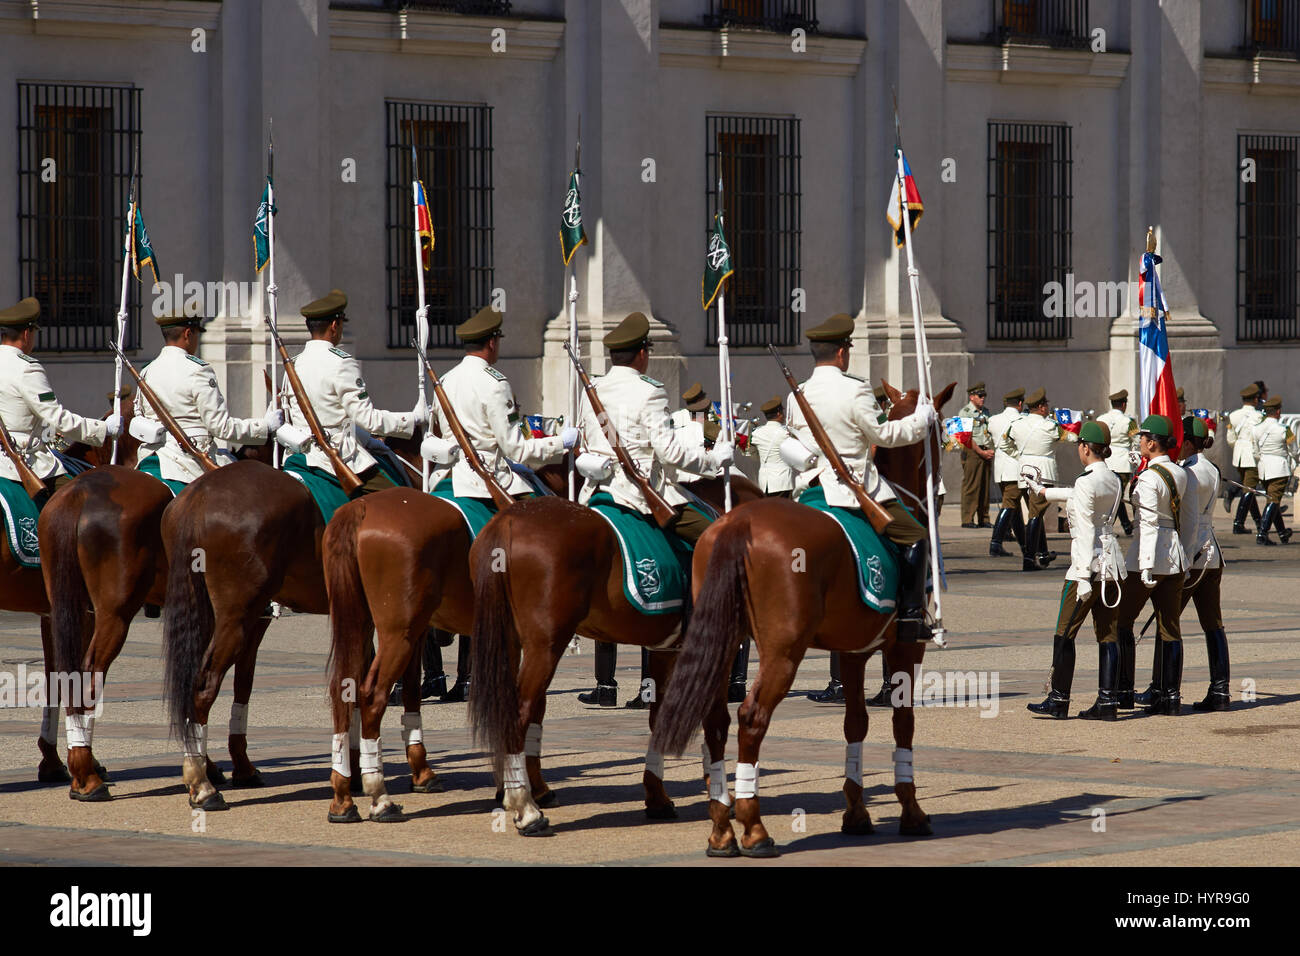 Carabineros de Chile in white summer uniform performing the Changing of the Guard ceremony outside La Moneda in Santiago, capital of Chile. Stock Photo